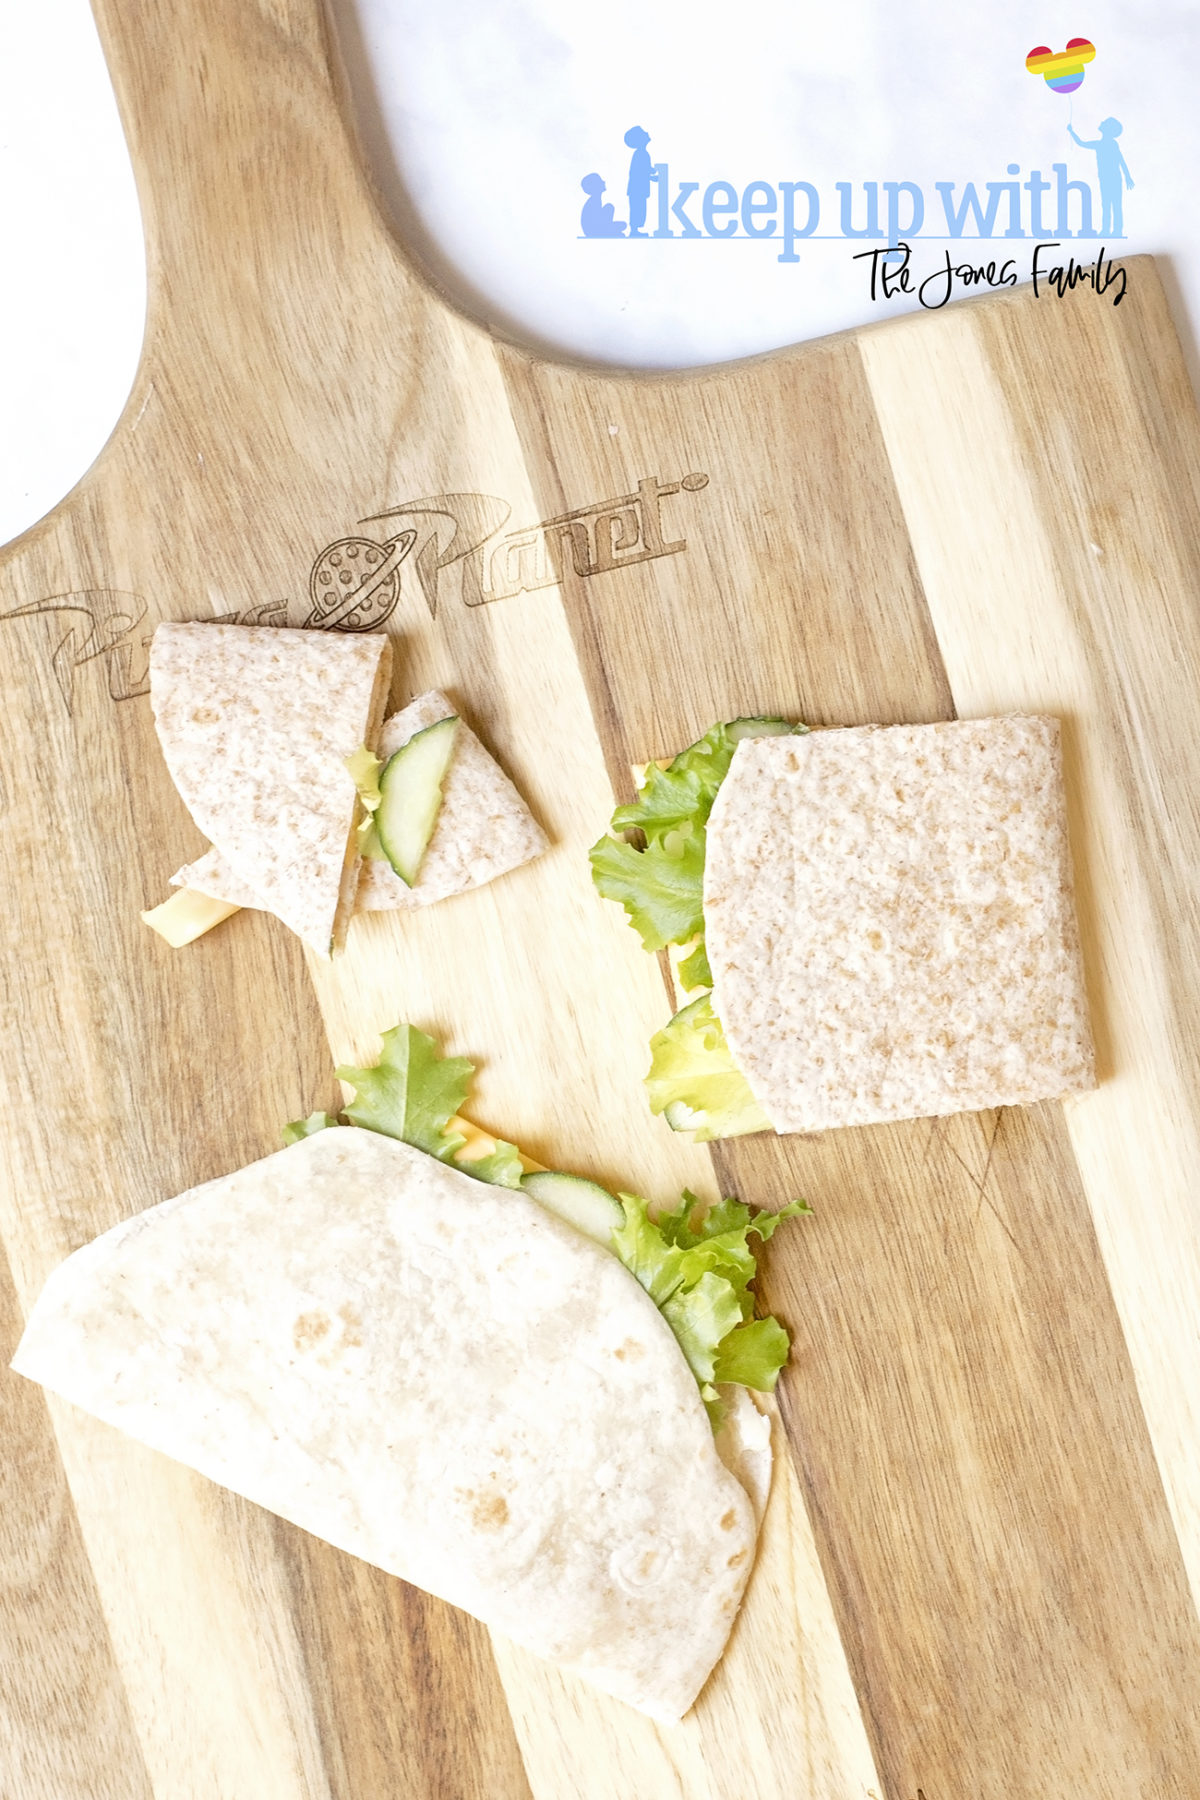 Image shows step two of how to make a book sandwich wrap. On a toy story wooden chopping board sits two wraps filled with ingredients, folder over and one of them is chopped into a booklet shape. Image by Sara-Jayne from Keep Up With The Jones Family.